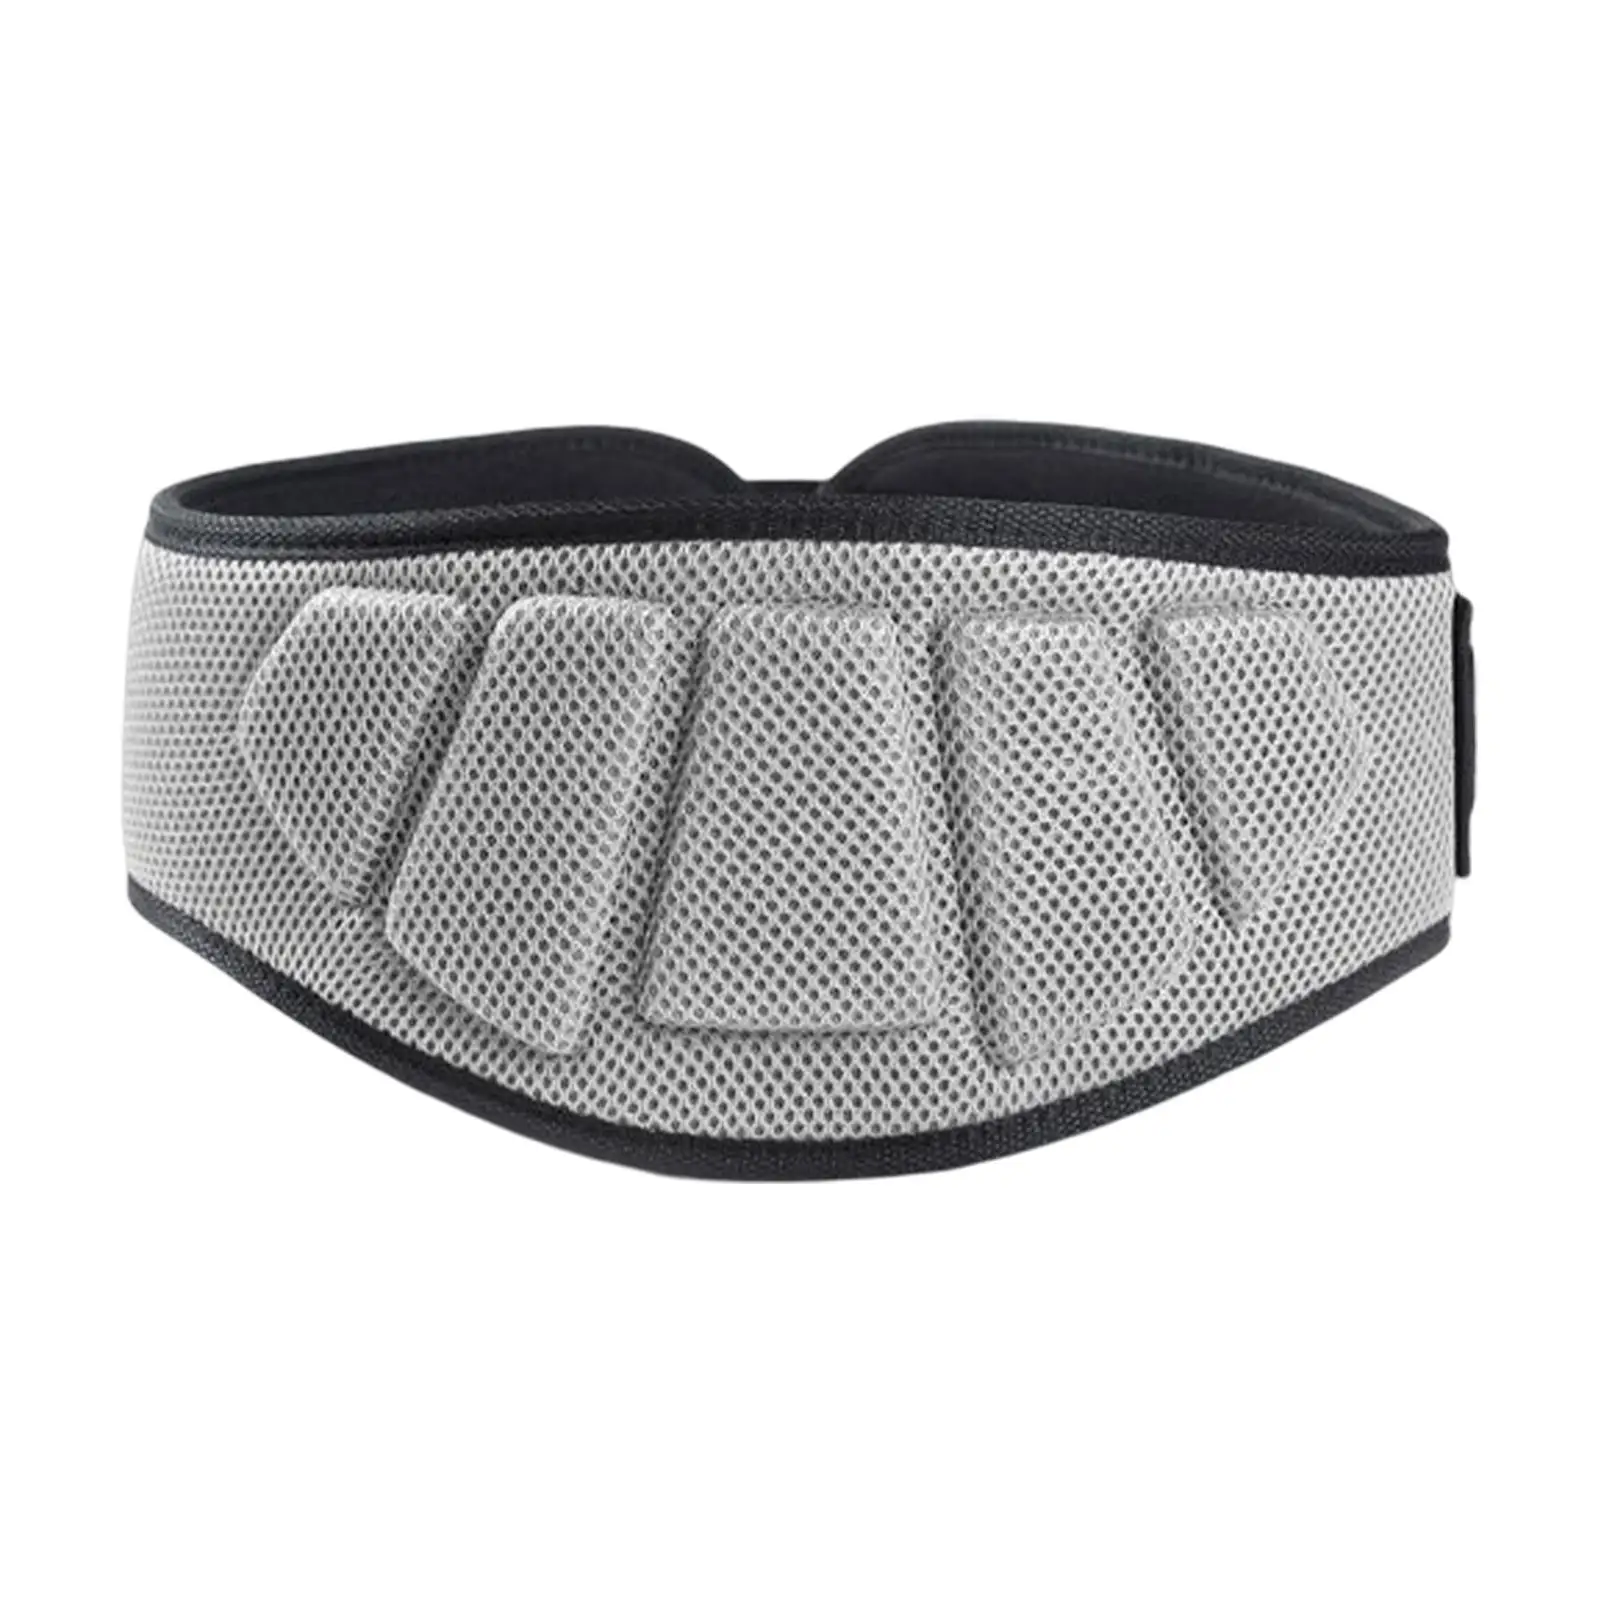 Weight Lifting Belt Weightlifting Belt Back Support Accessories Exercise Gym